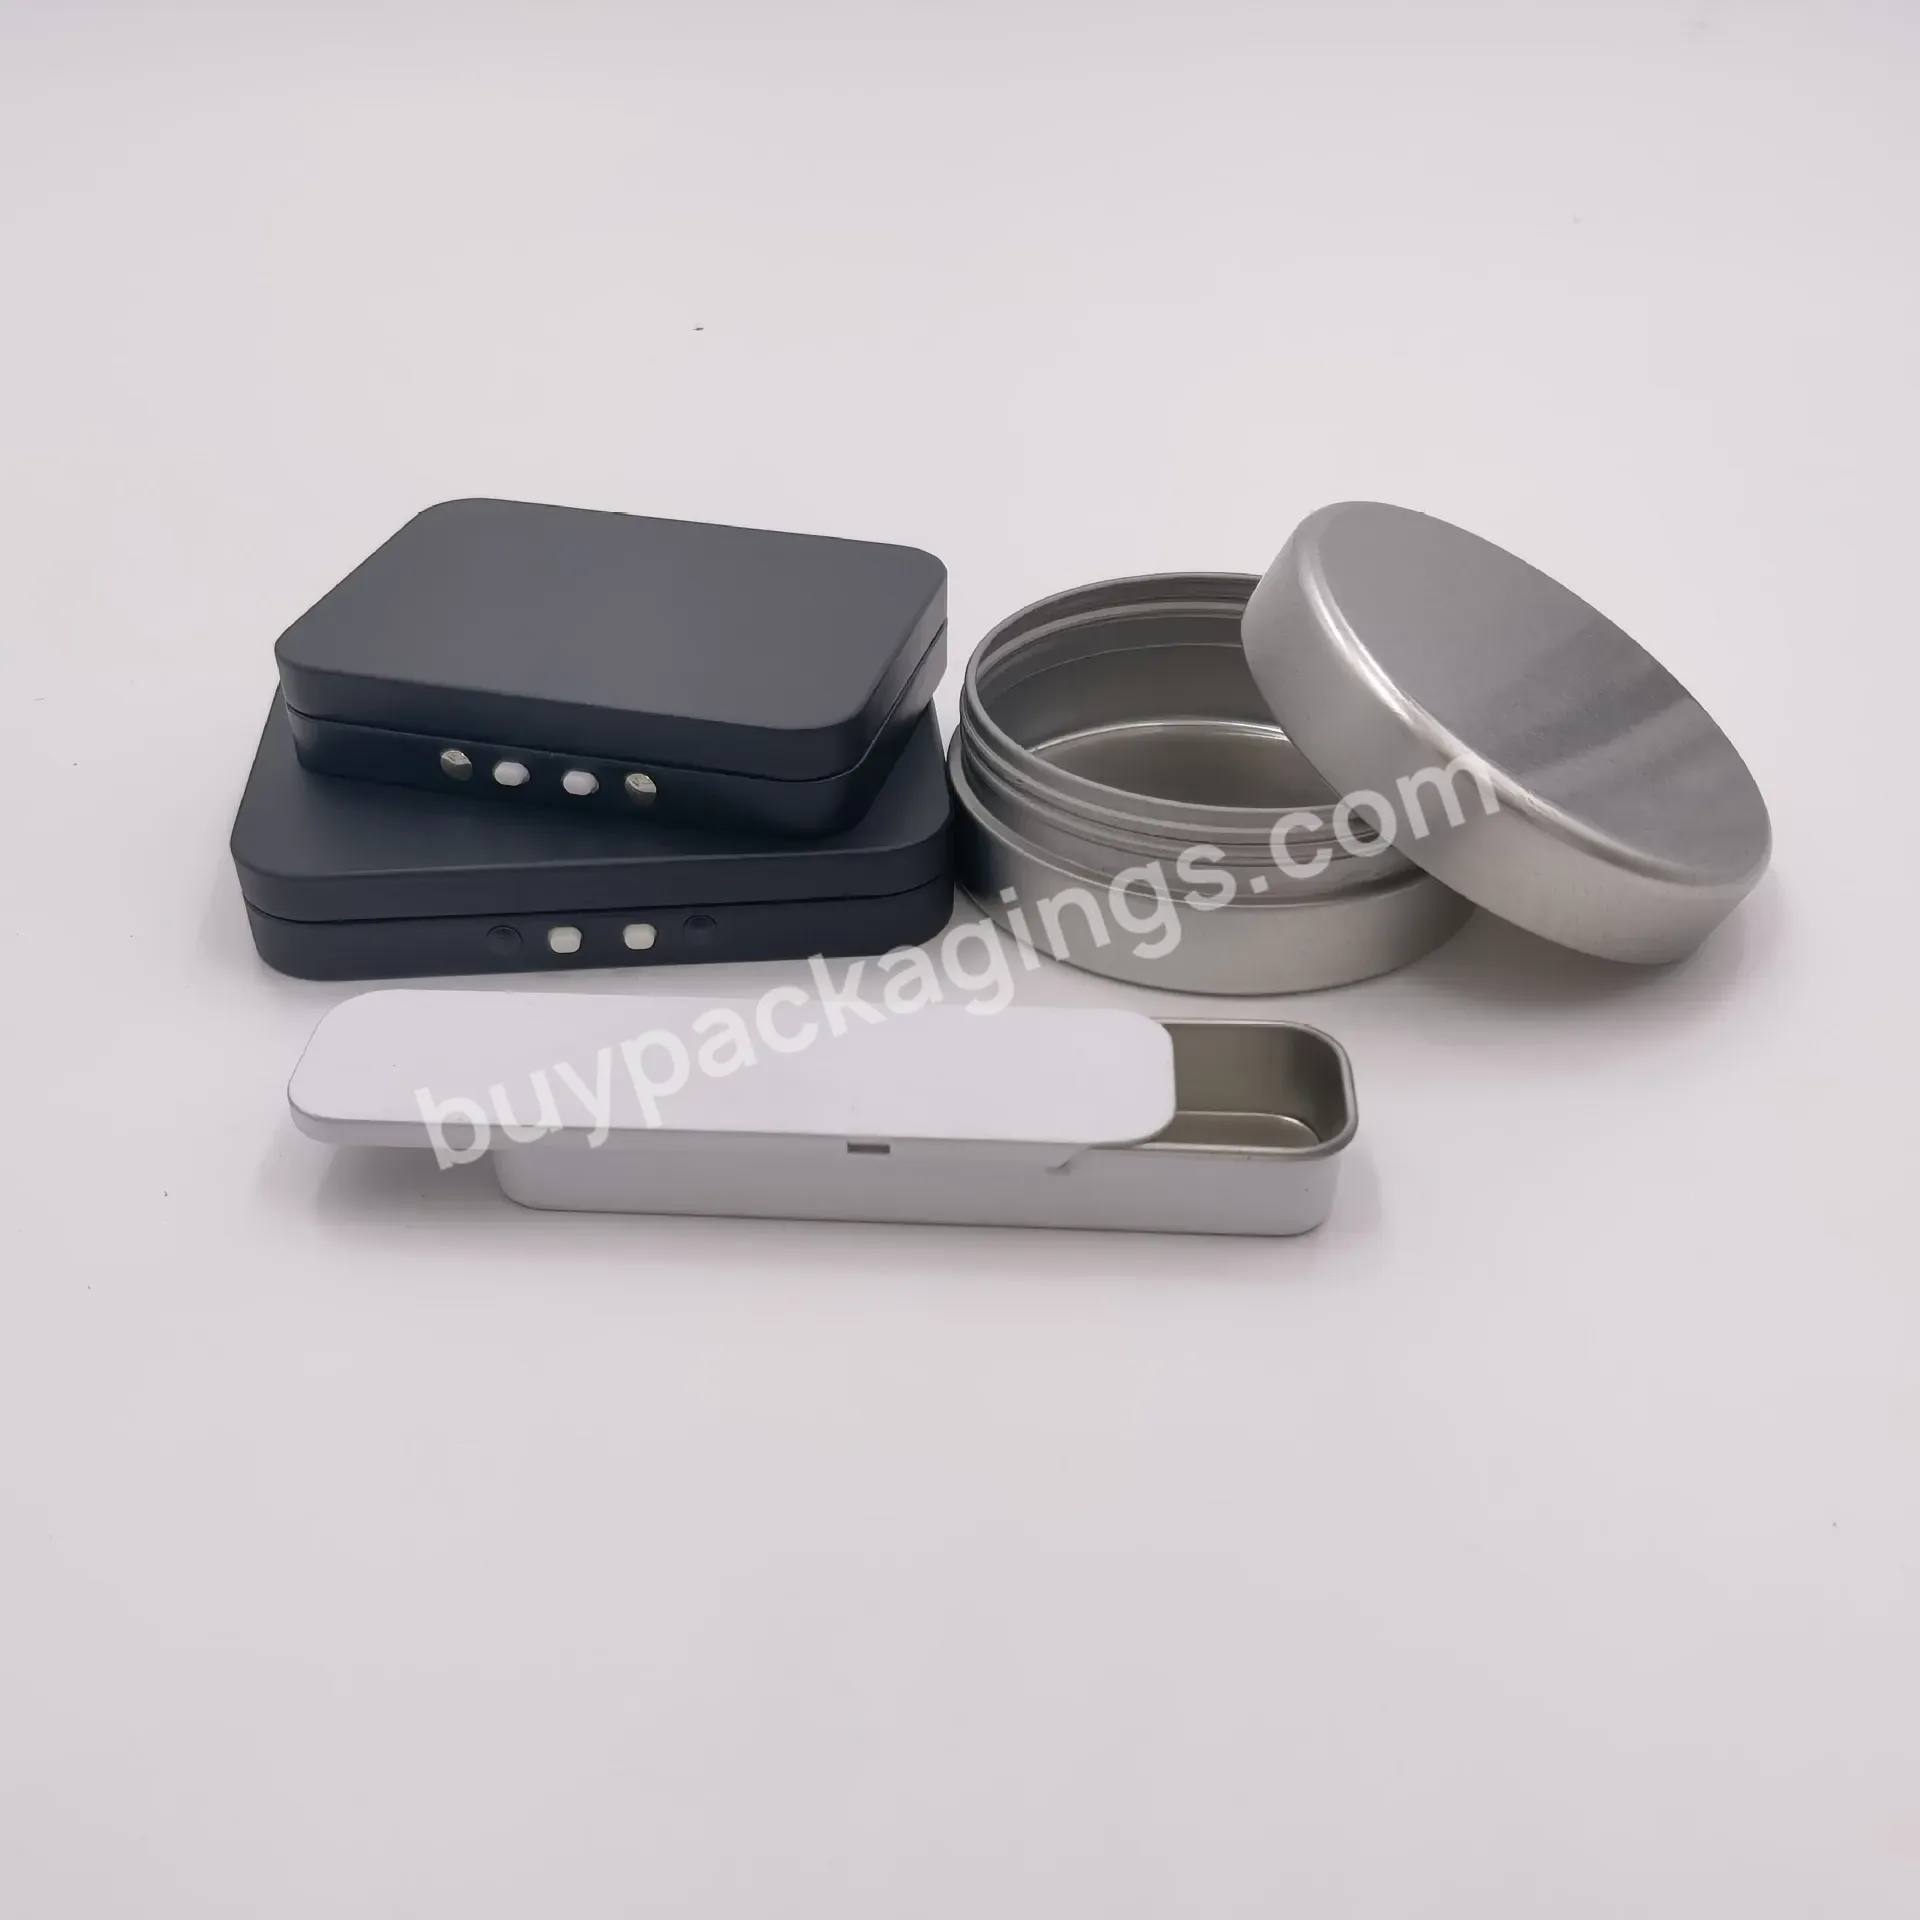 Child Resistant Tin Container Slide Top Tin Box For Pill Packaging With Custom Design Hinged Lid Cr Tin Box - Buy Child Proof Tin Case / Child Resistant Hinged Tin Box,Slide Tin Box / Hinged Tin Case With Lock,Safe Lock Tin Box.